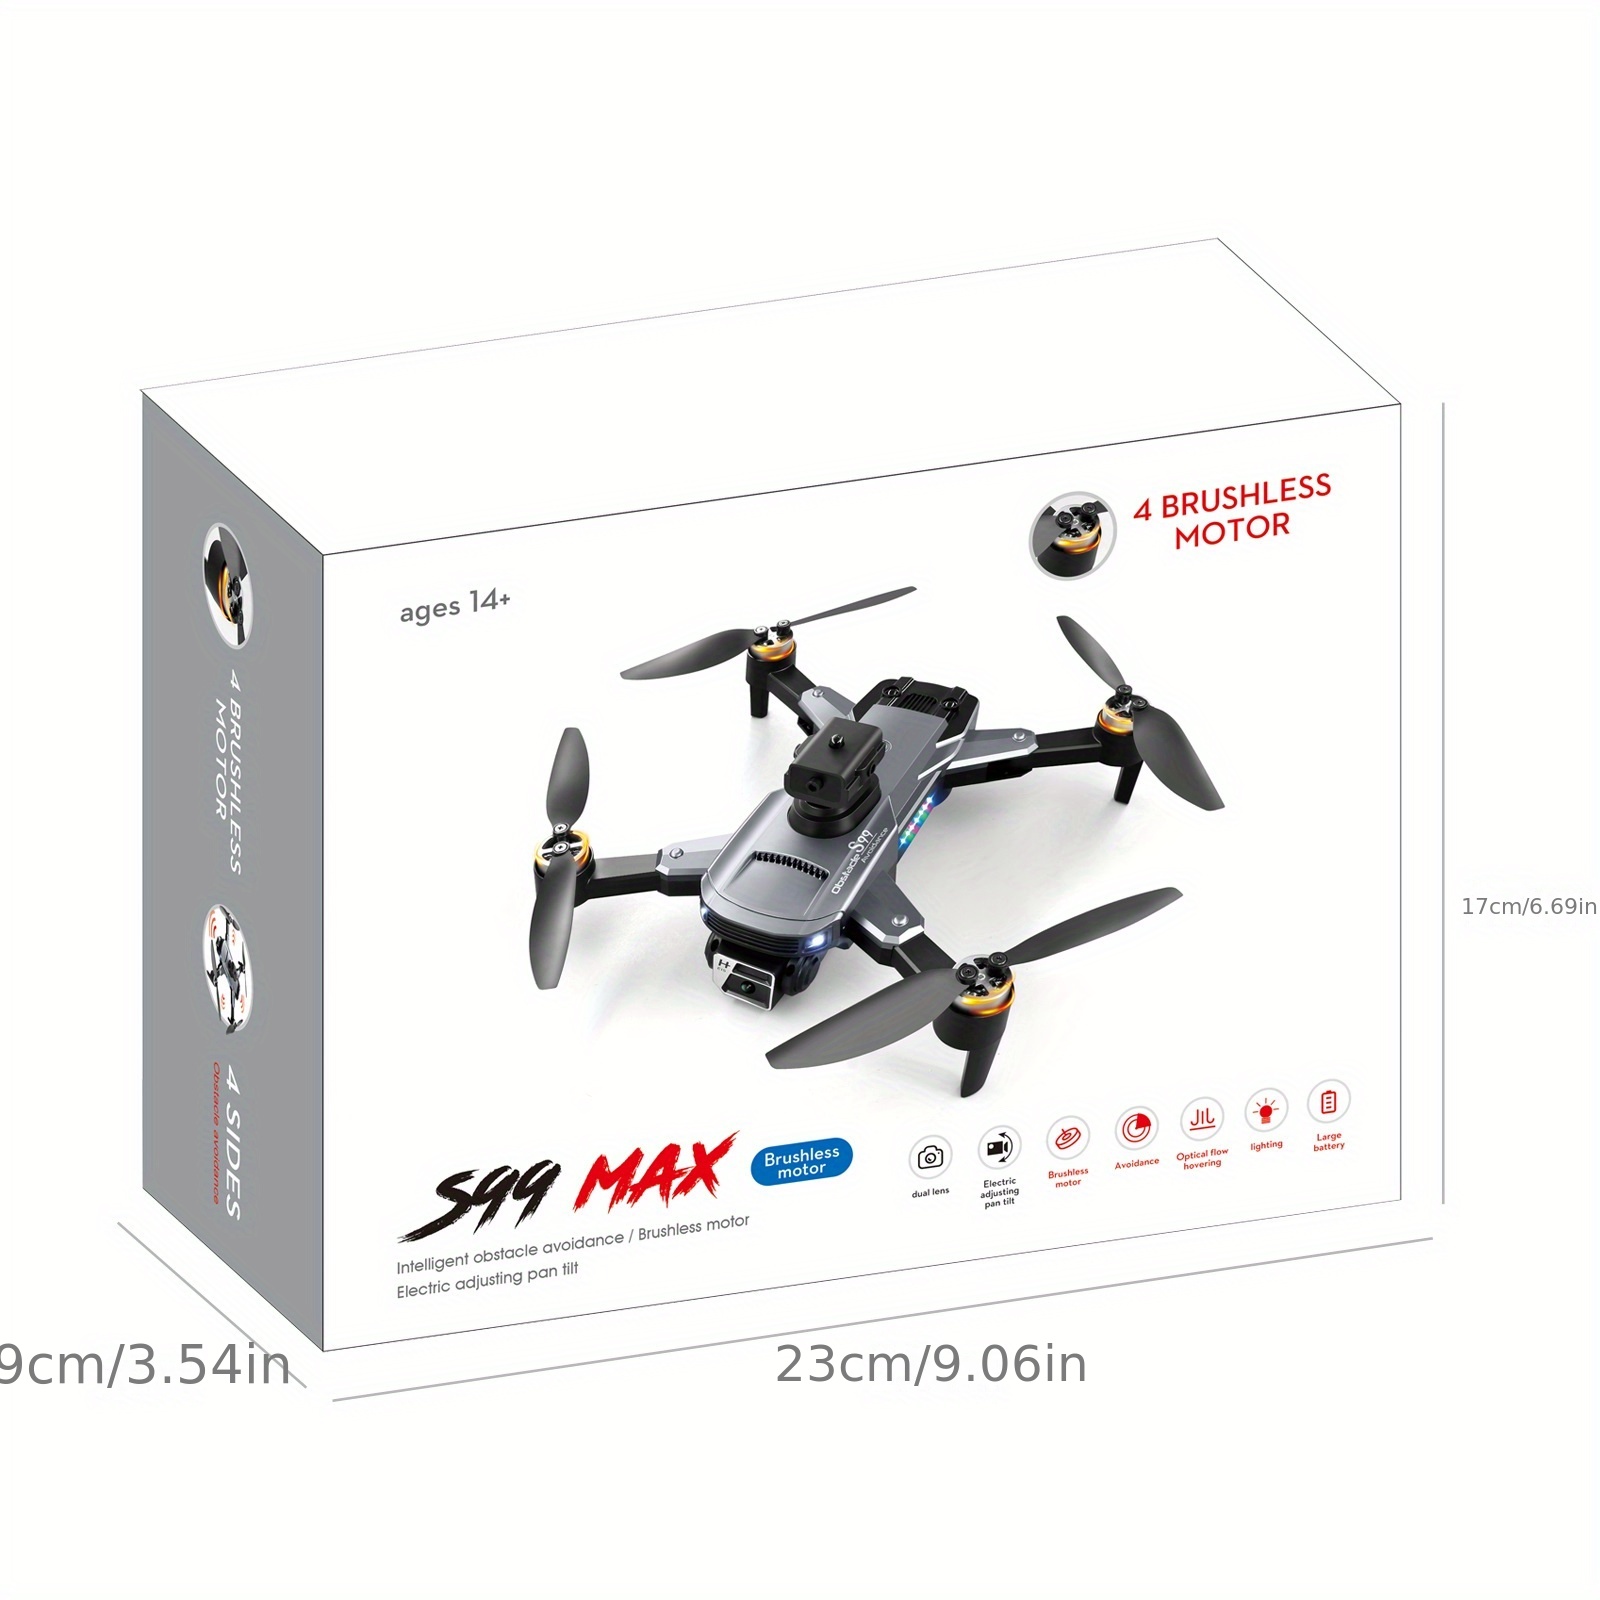 s99 5g gps drone hd real time aerial photography obstacle avoidance quadrotor helicopter rc distance 100m uav details 23